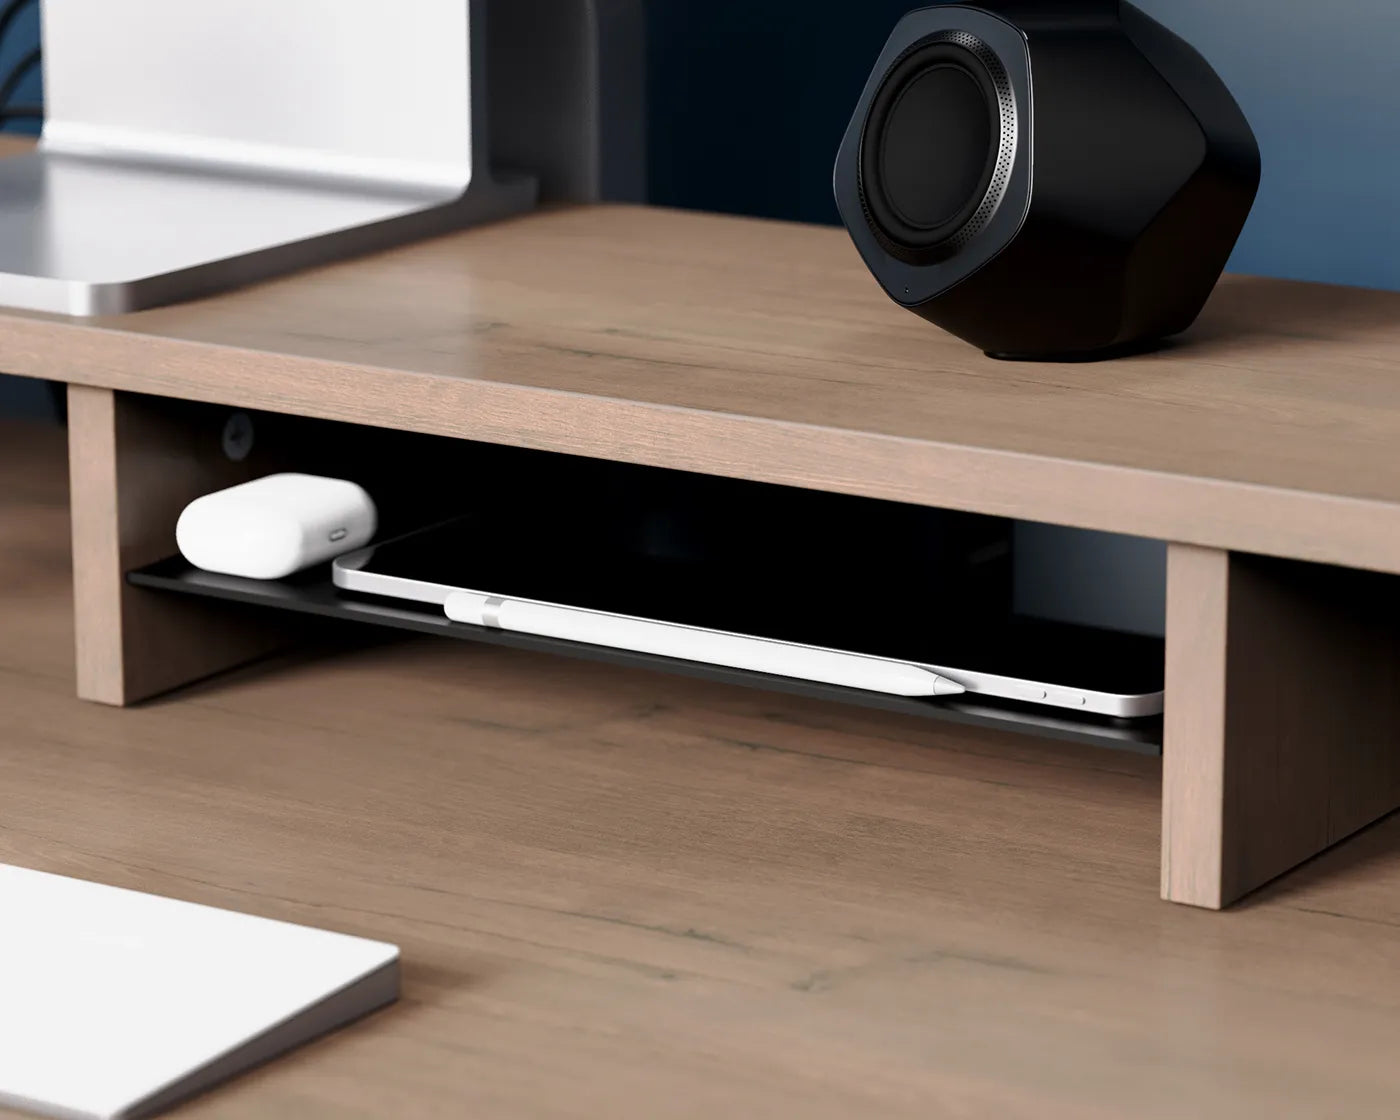 A speaker and a laptop shelf beneath a monitor riser, showcasing the riser's capacity for organizing and streamlining workspaces.